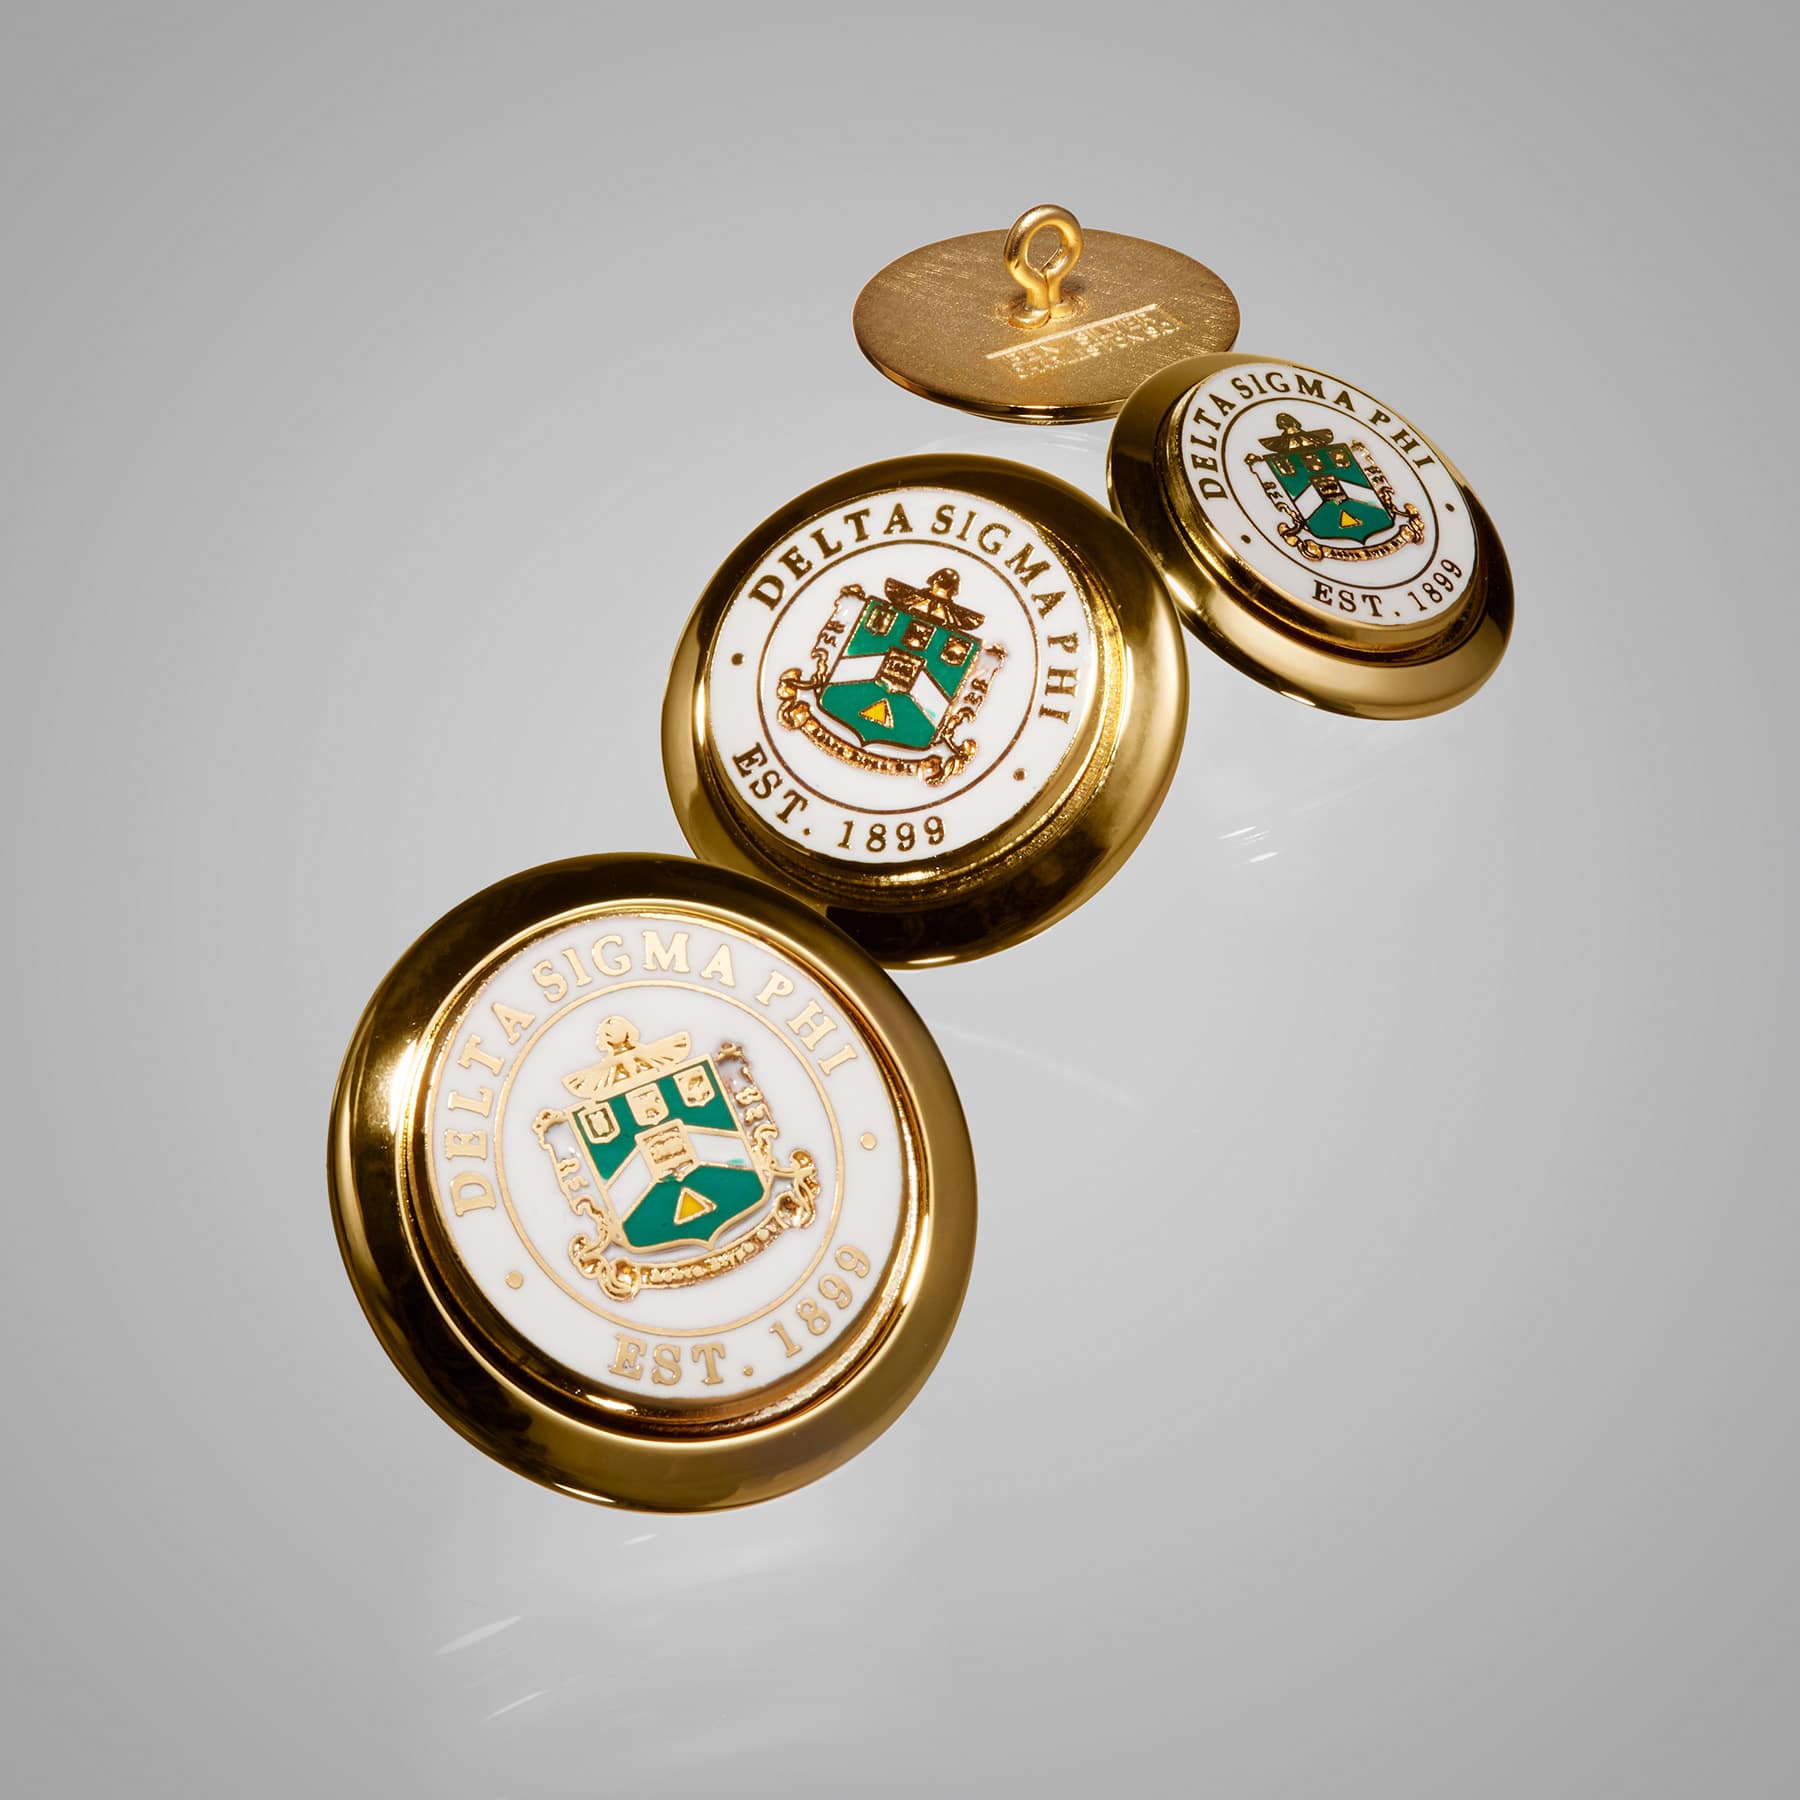 Delta Sigma PHI recognition embedments jewelry